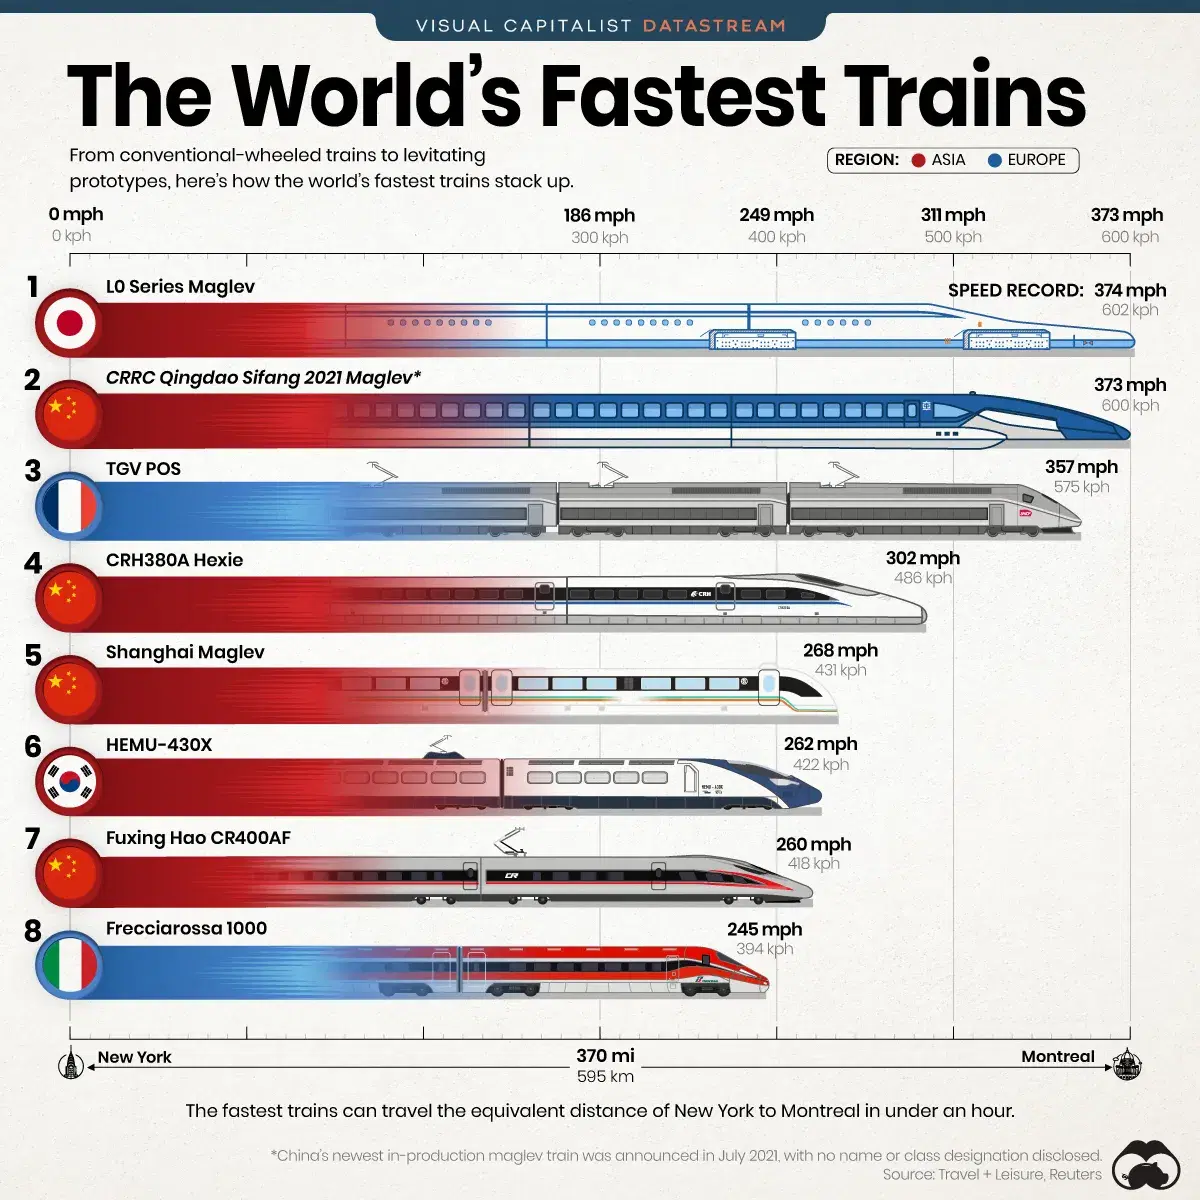 Visualizing the Fastest Trains in the World